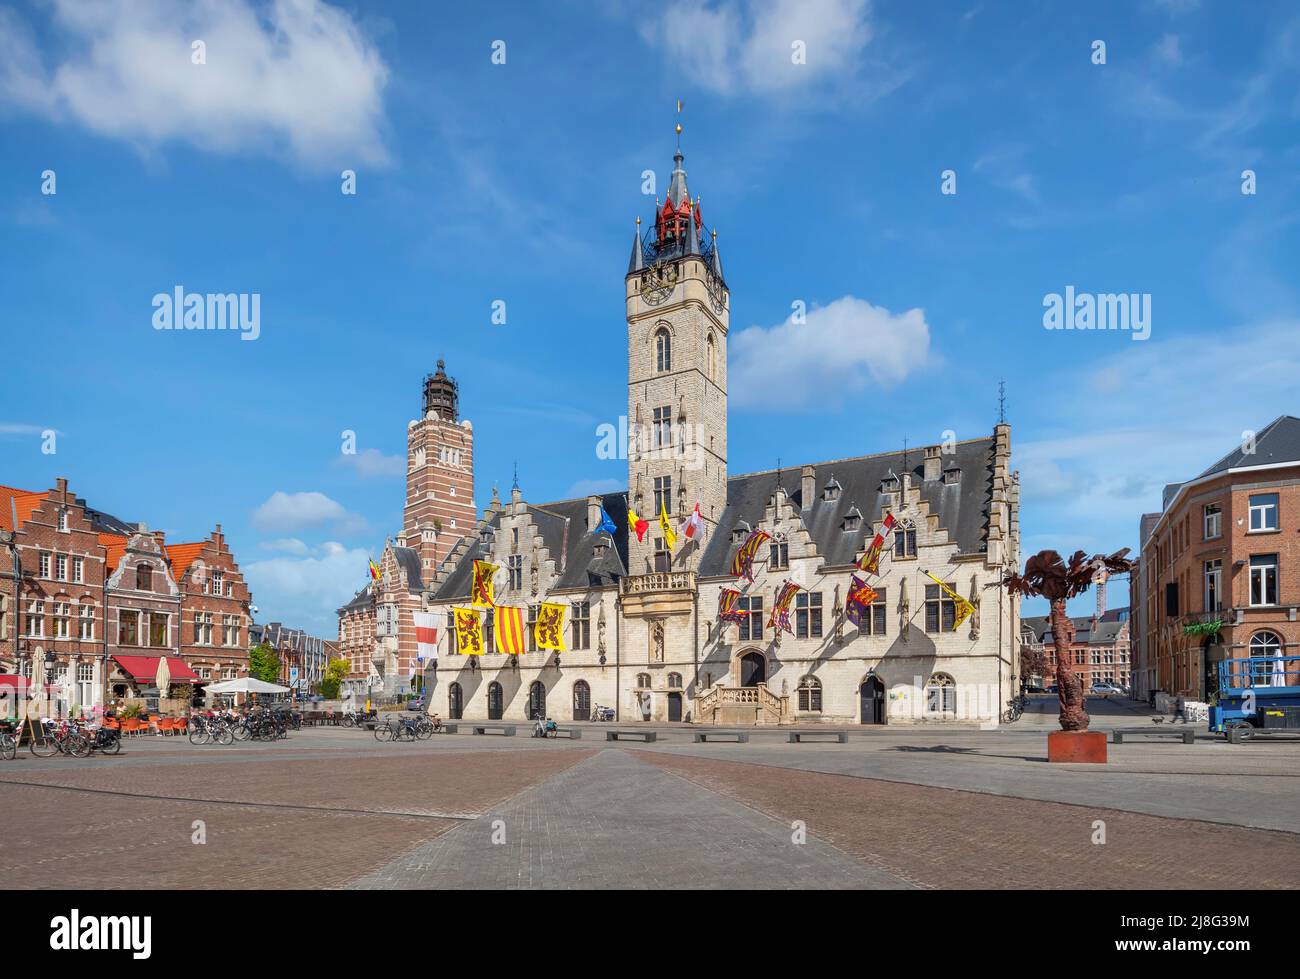 Dendermonde, Belgium. View of historic building of Town Hall with belfry tower on Grote Markt square Stock Photo